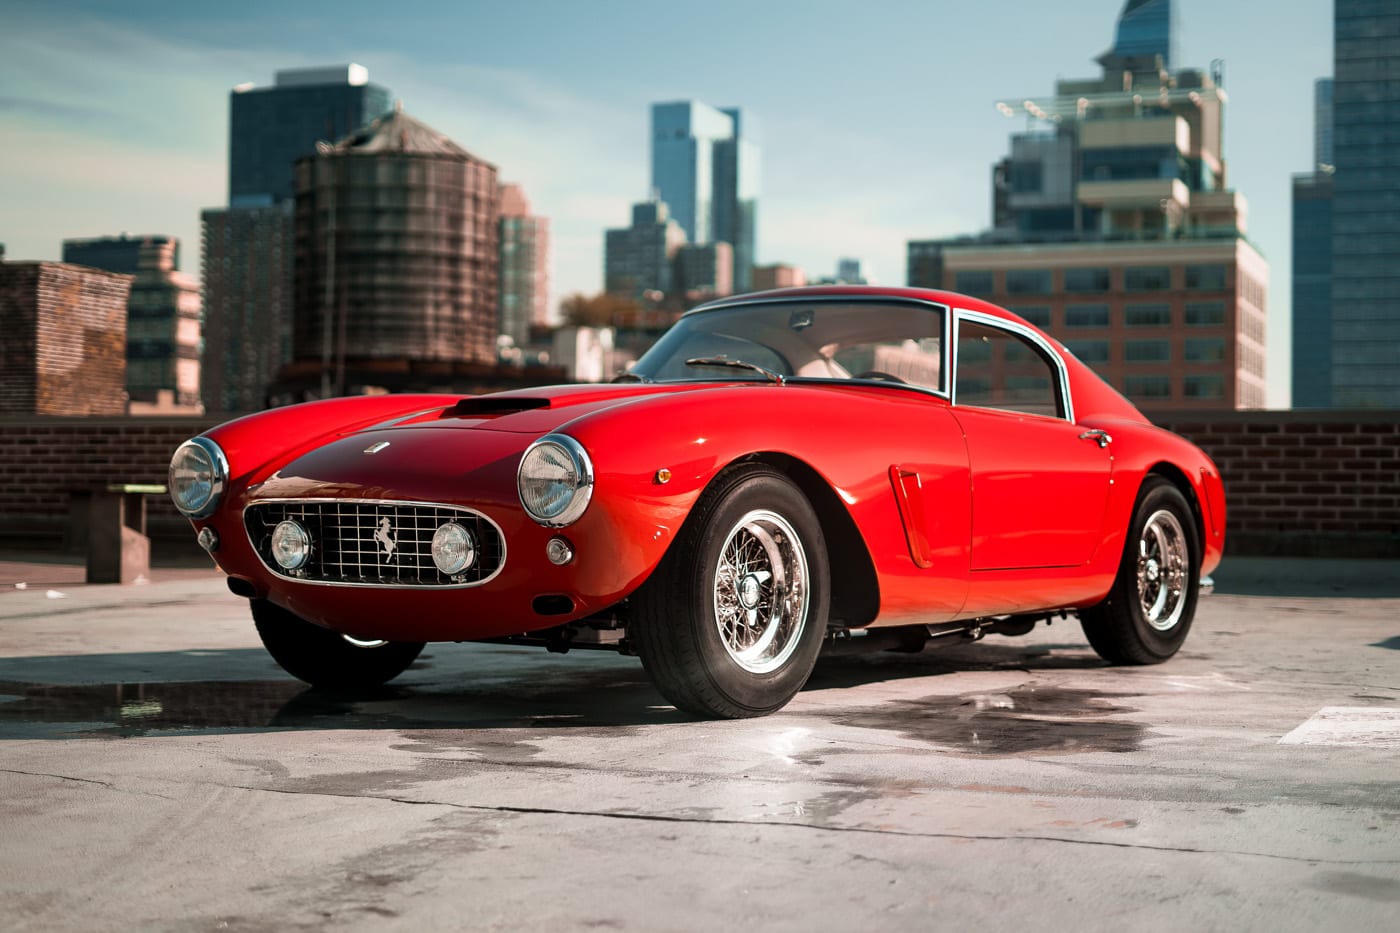 Discover The Cover October Revival 250 Swb By Gto Engineering For Sale At Manhattan Motorcars